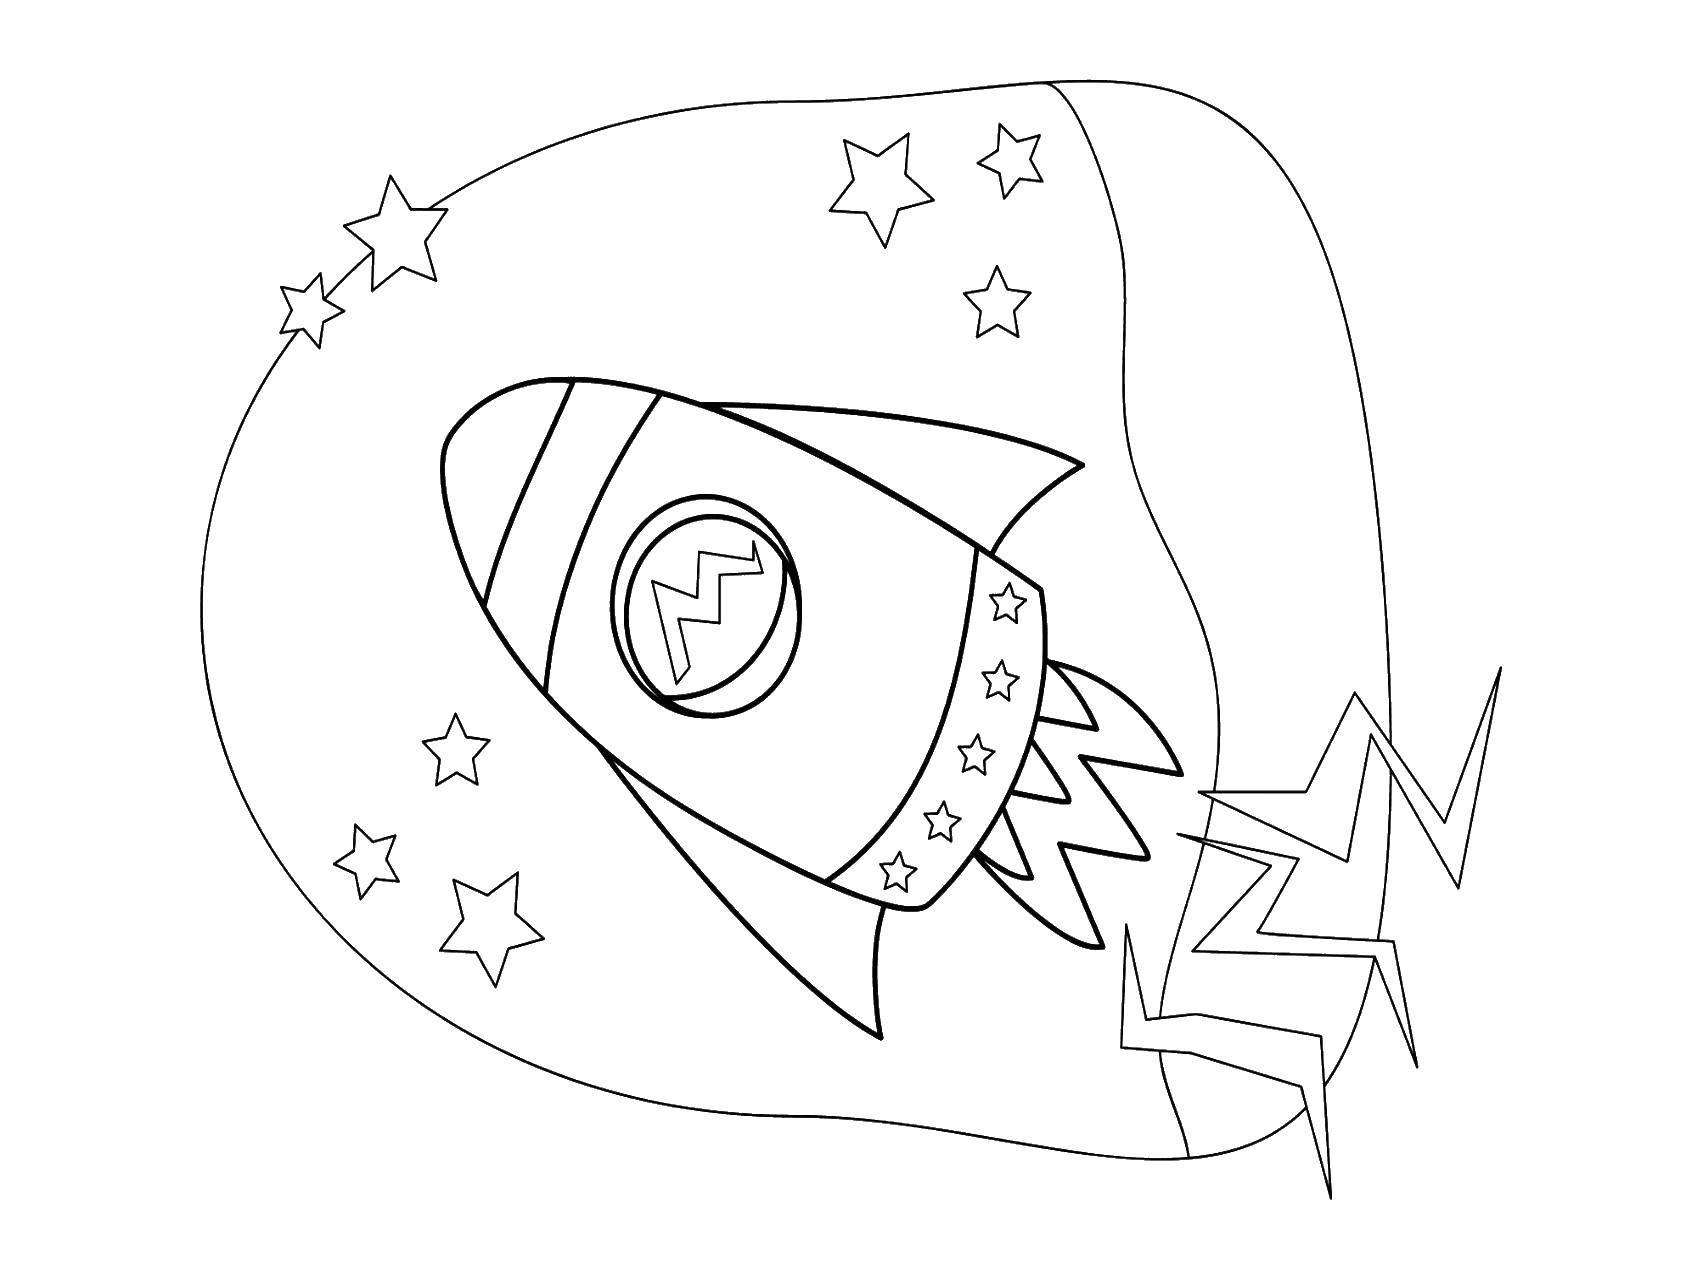 Coloring Rocket. Category rockets. Tags:  rocket, space, kids.